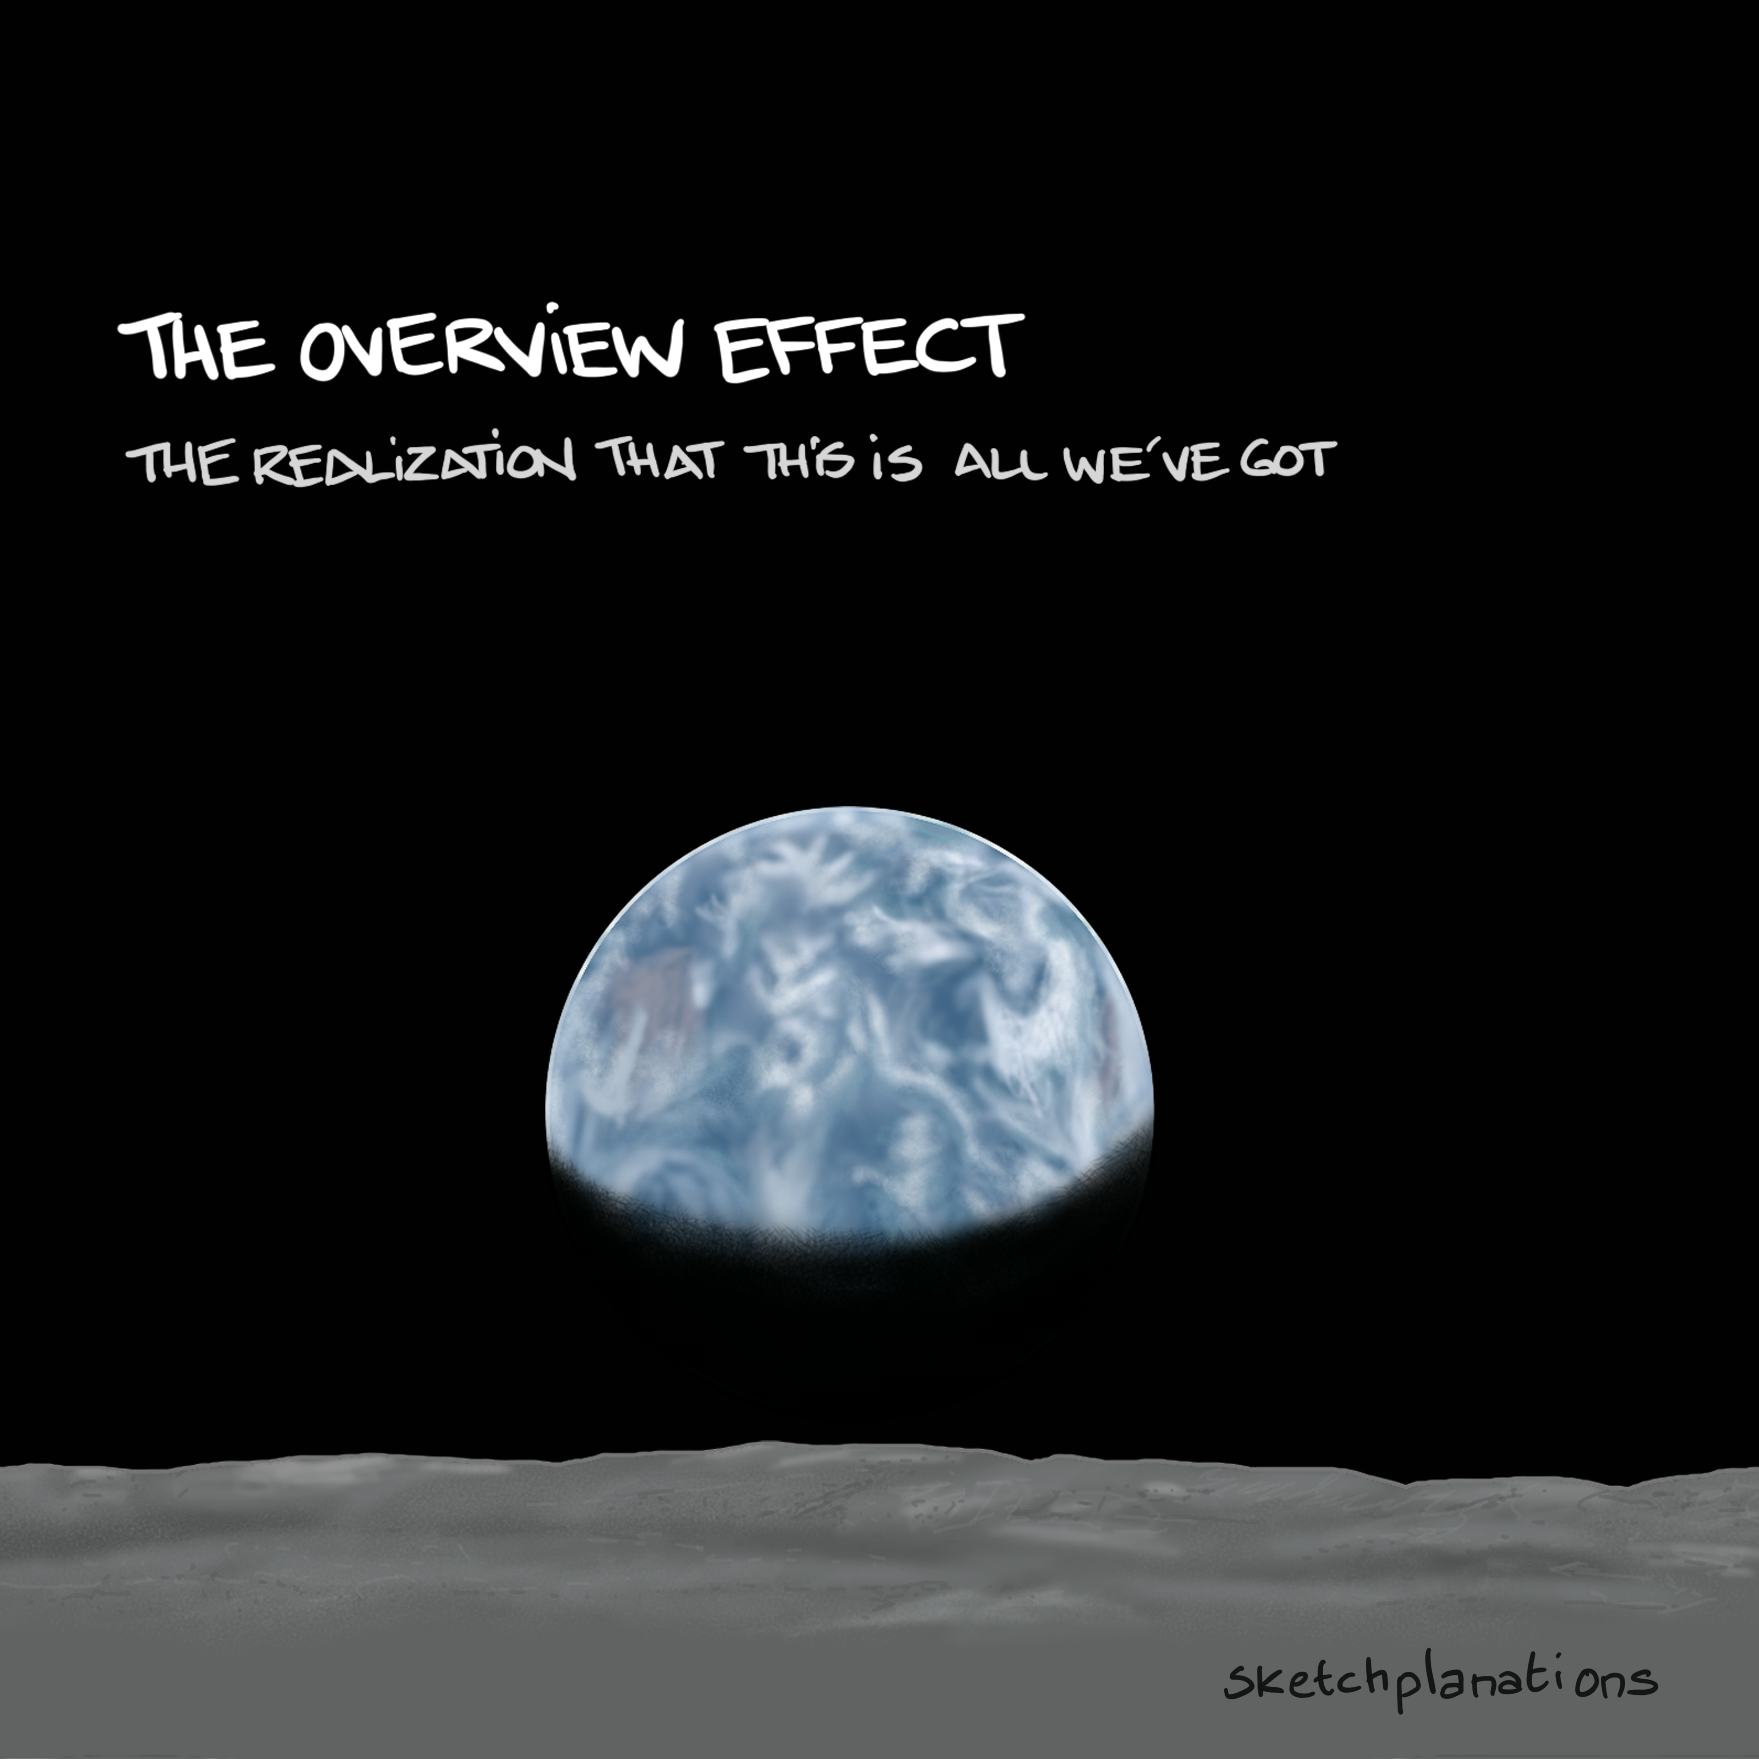 The overview effect - Sketchplanations